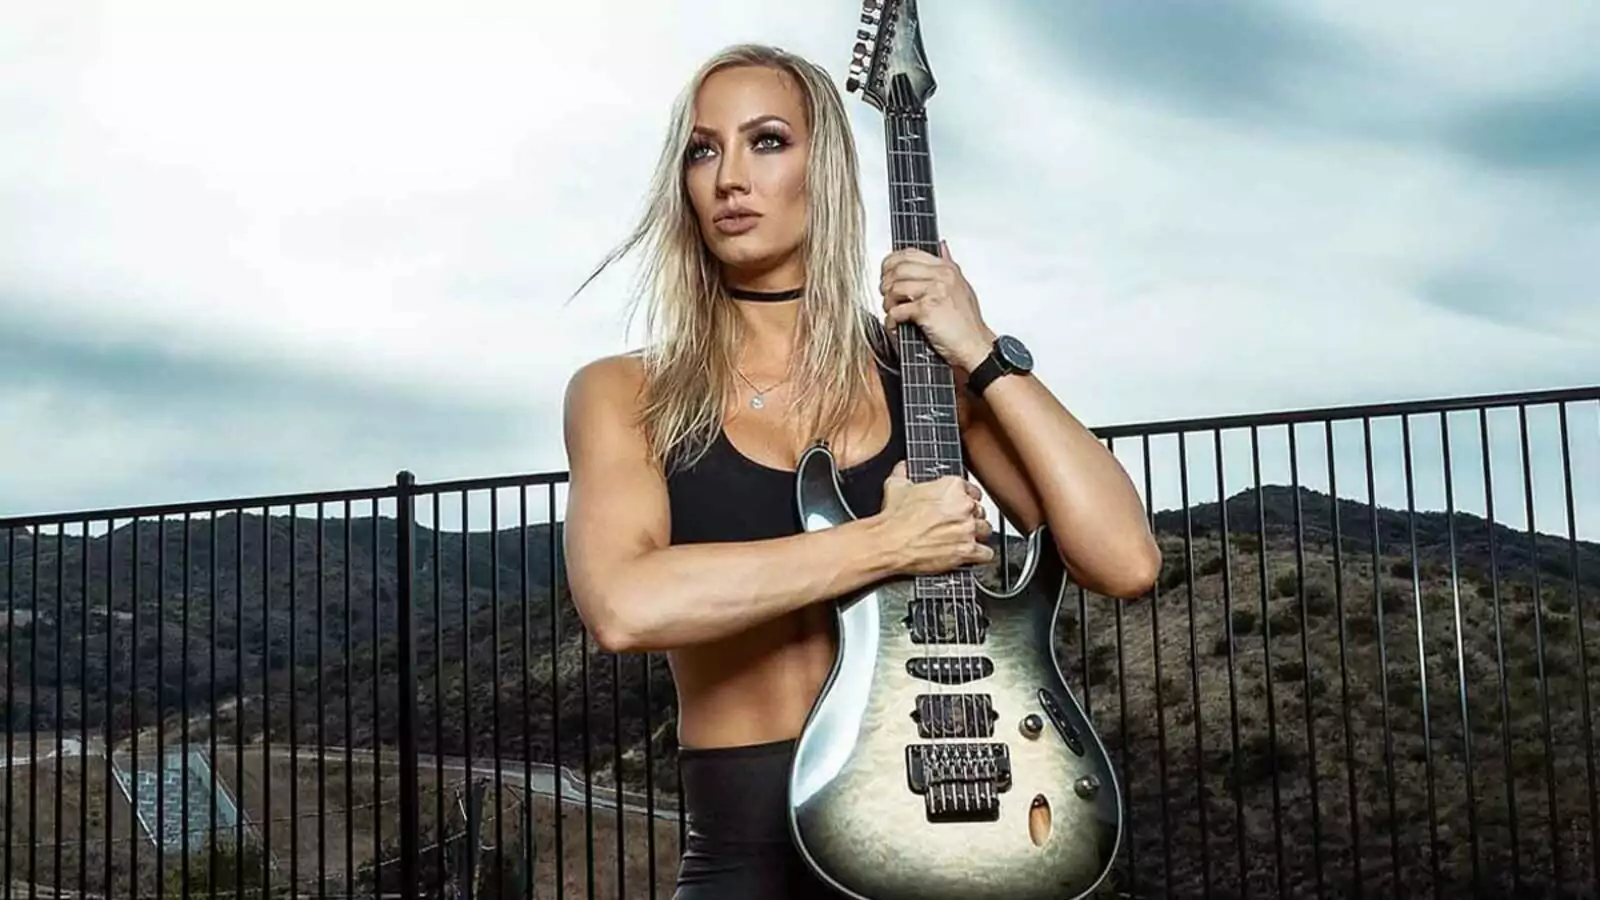 Nita Strauss Releases New Single "Winner Takes All" featuring Alice Cooper